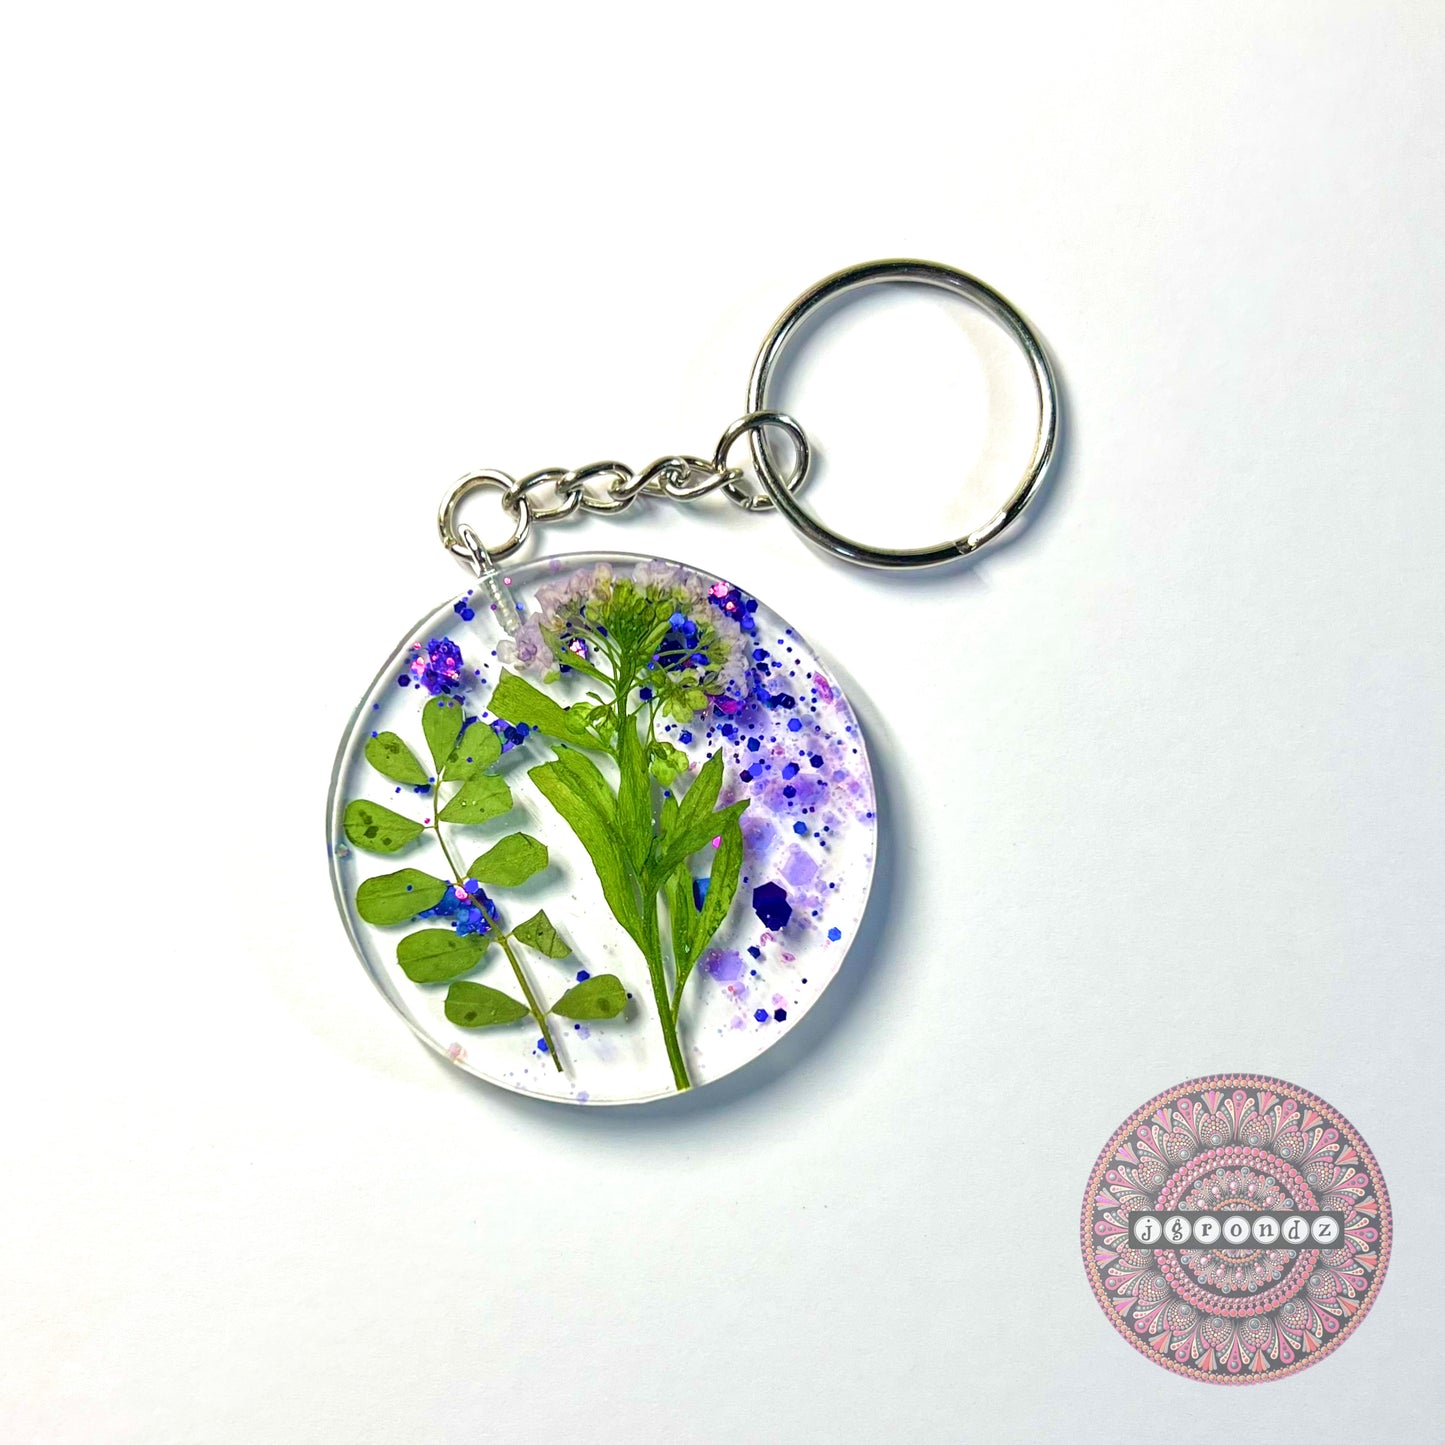 Pressed Flower Customizable Name Keychains